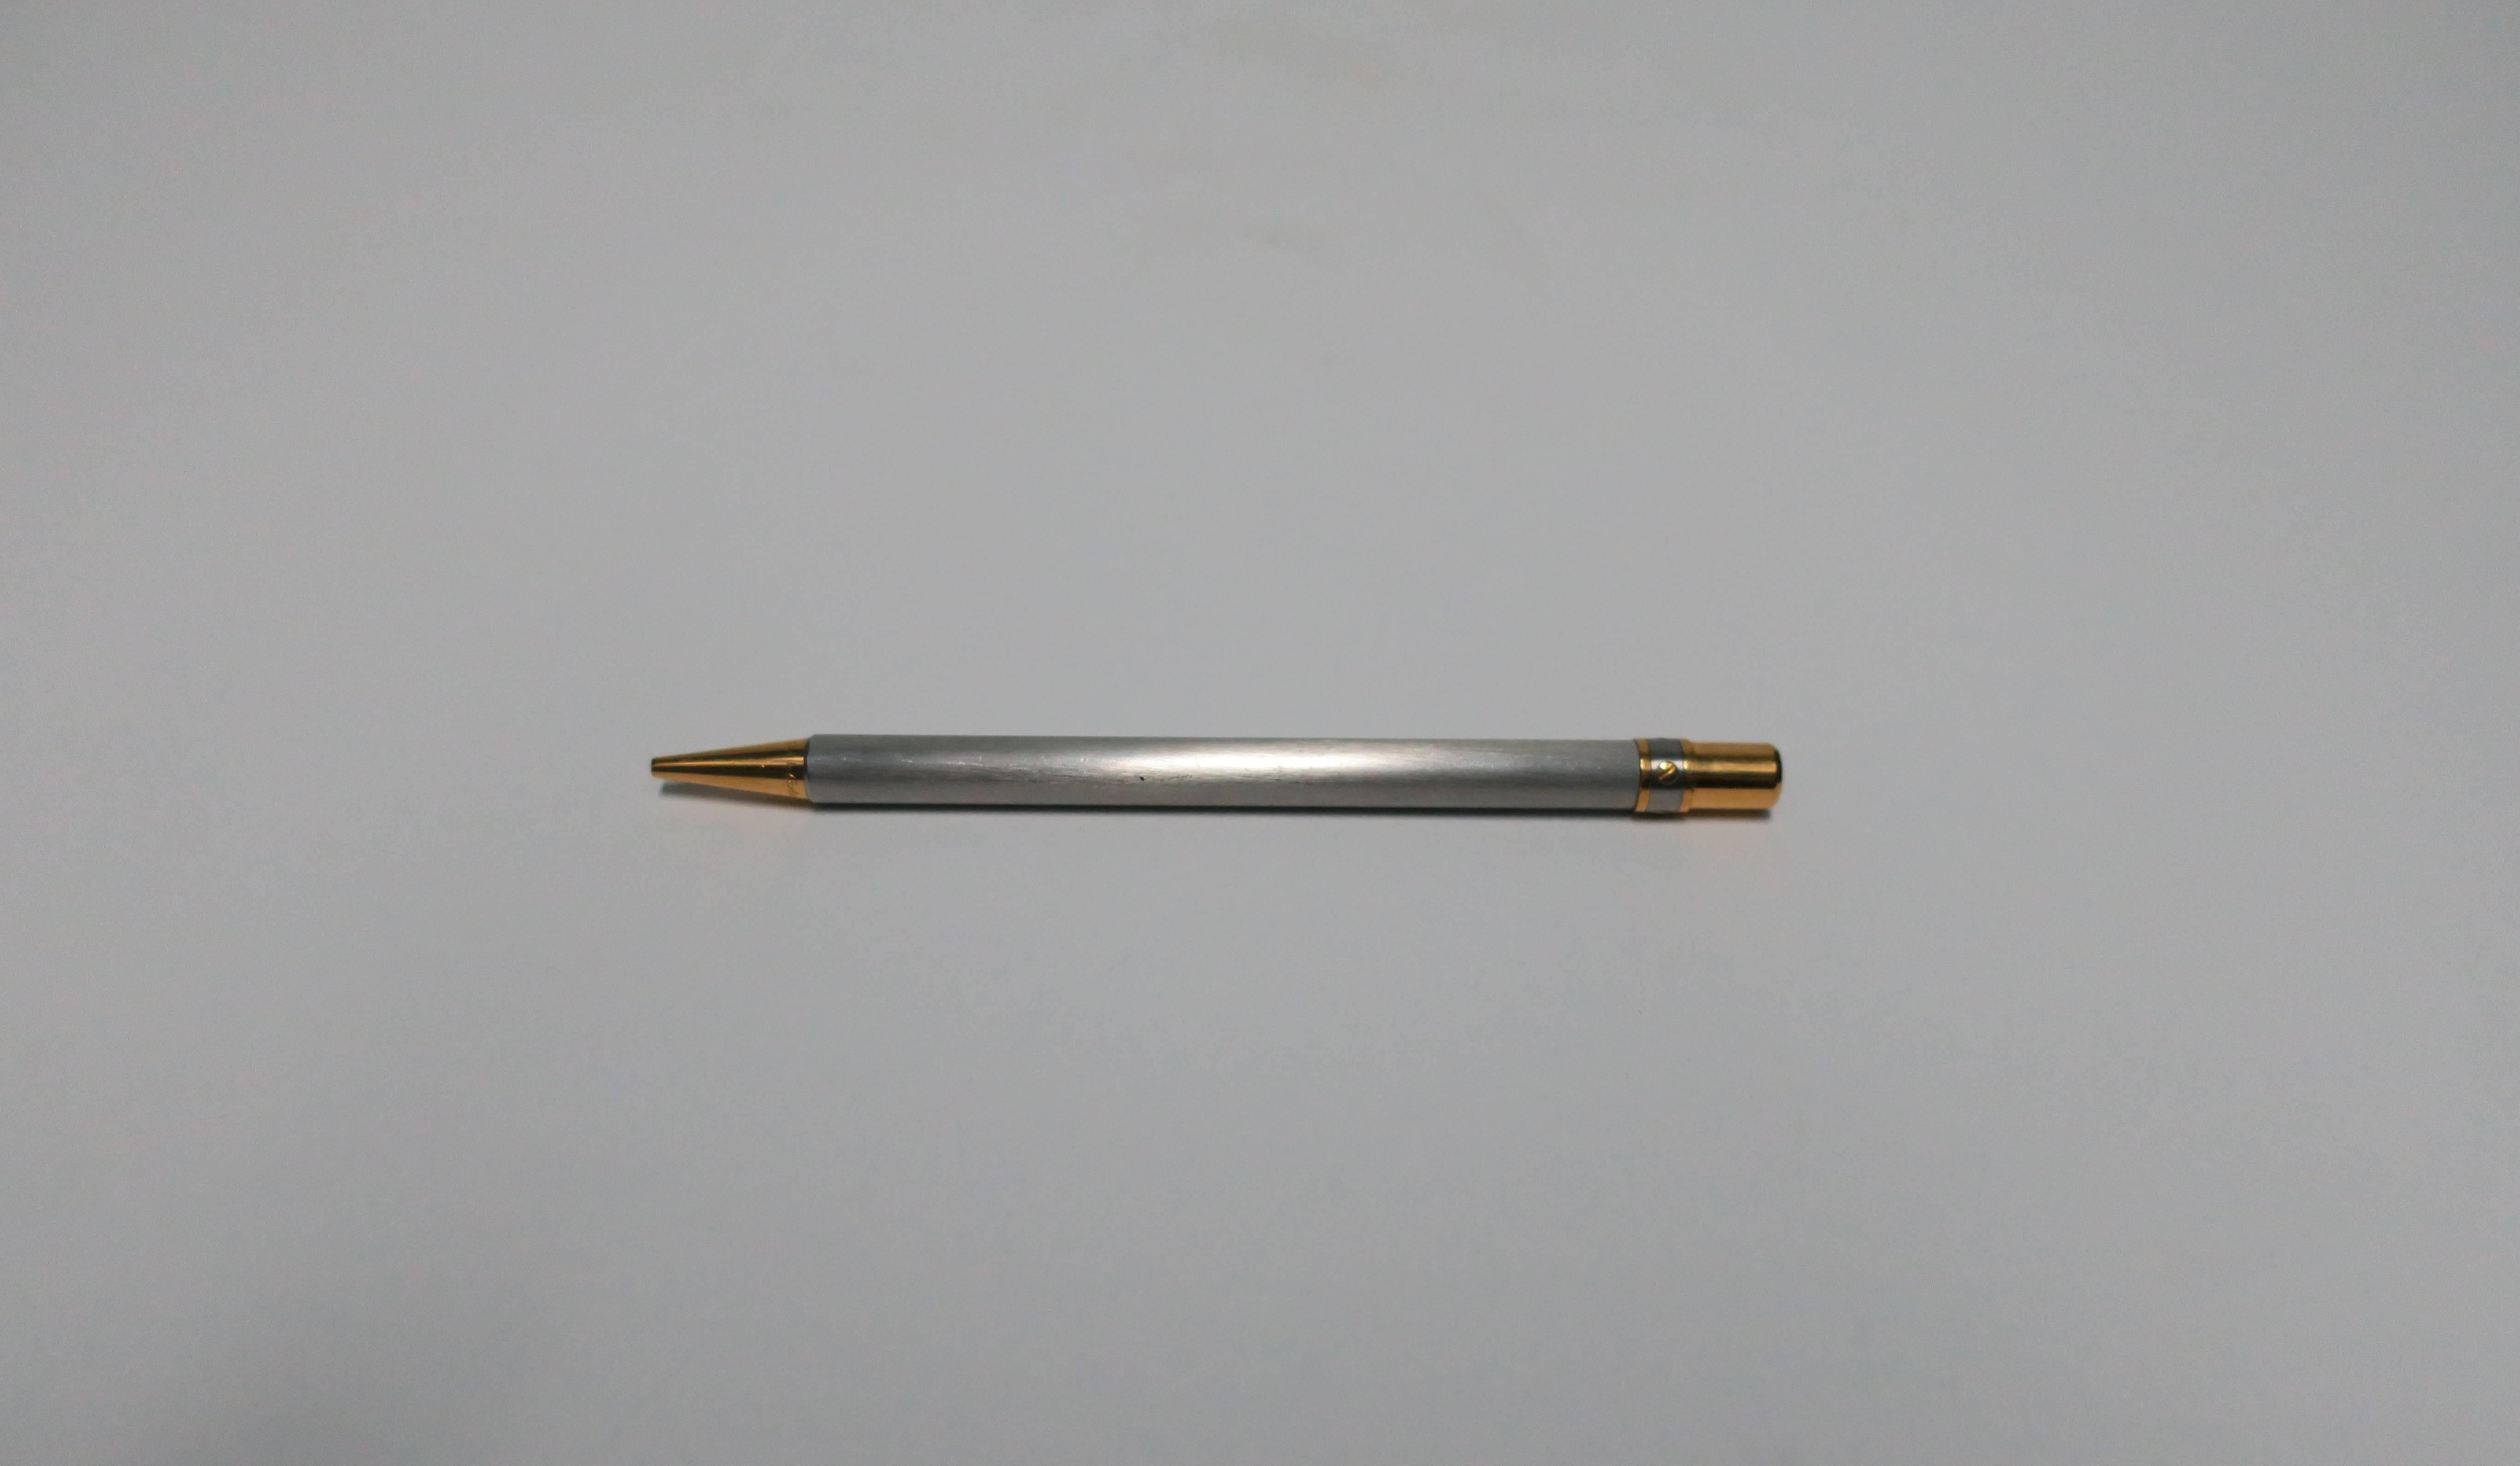 A substantial vintage two-tone Santos de Cartier ballpoint pen in a brushed metal steel and a golden-finish. Cartier engraved near ballpoint on gold metal as show in image. Cartier double C logo at opposite end of pen, as shown in image. Made in